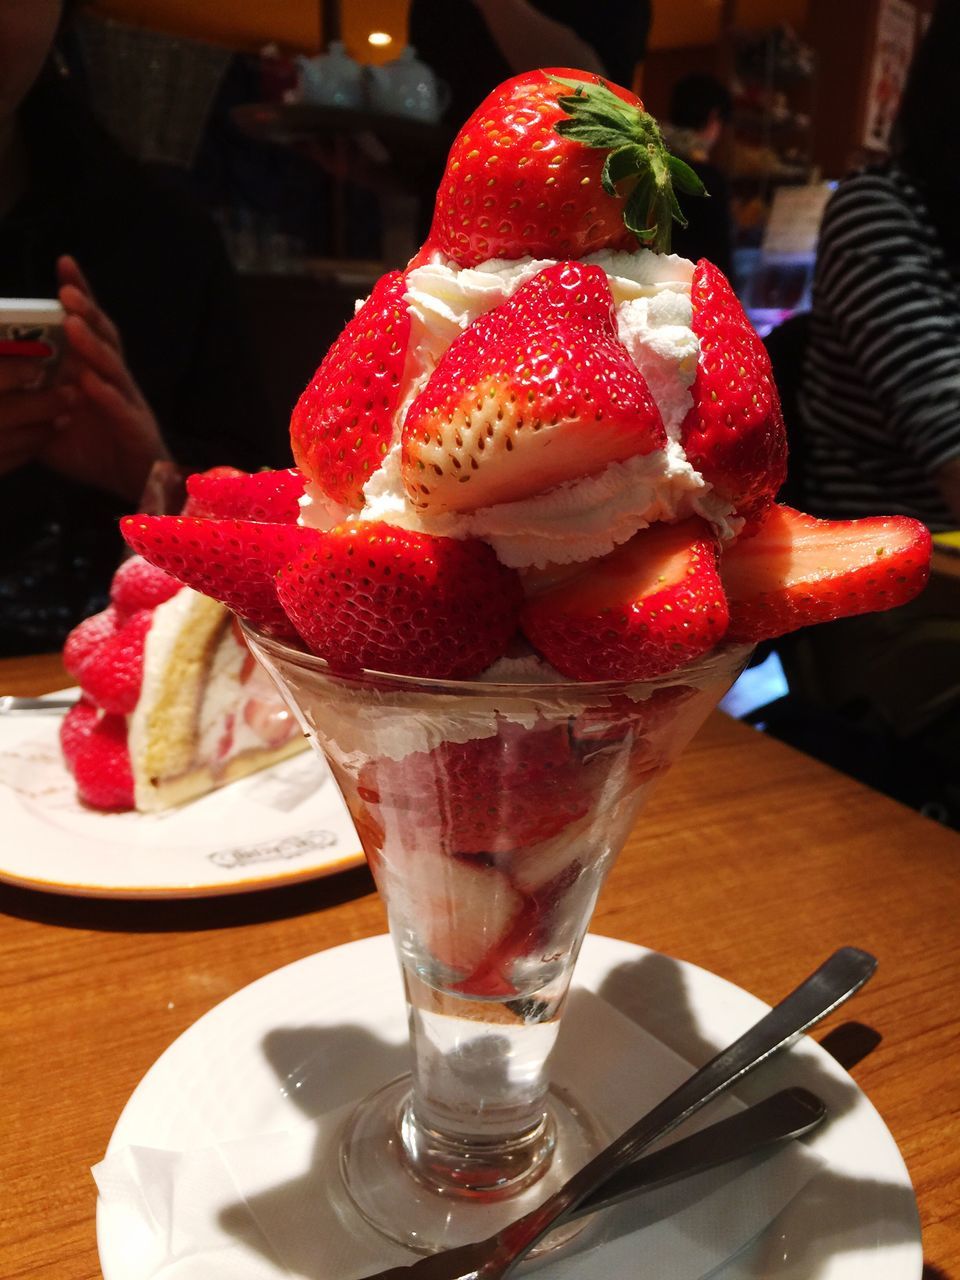 red, food and drink, temptation, close-up, freshness, food, table, indoors, no people, day, ice cream sundae